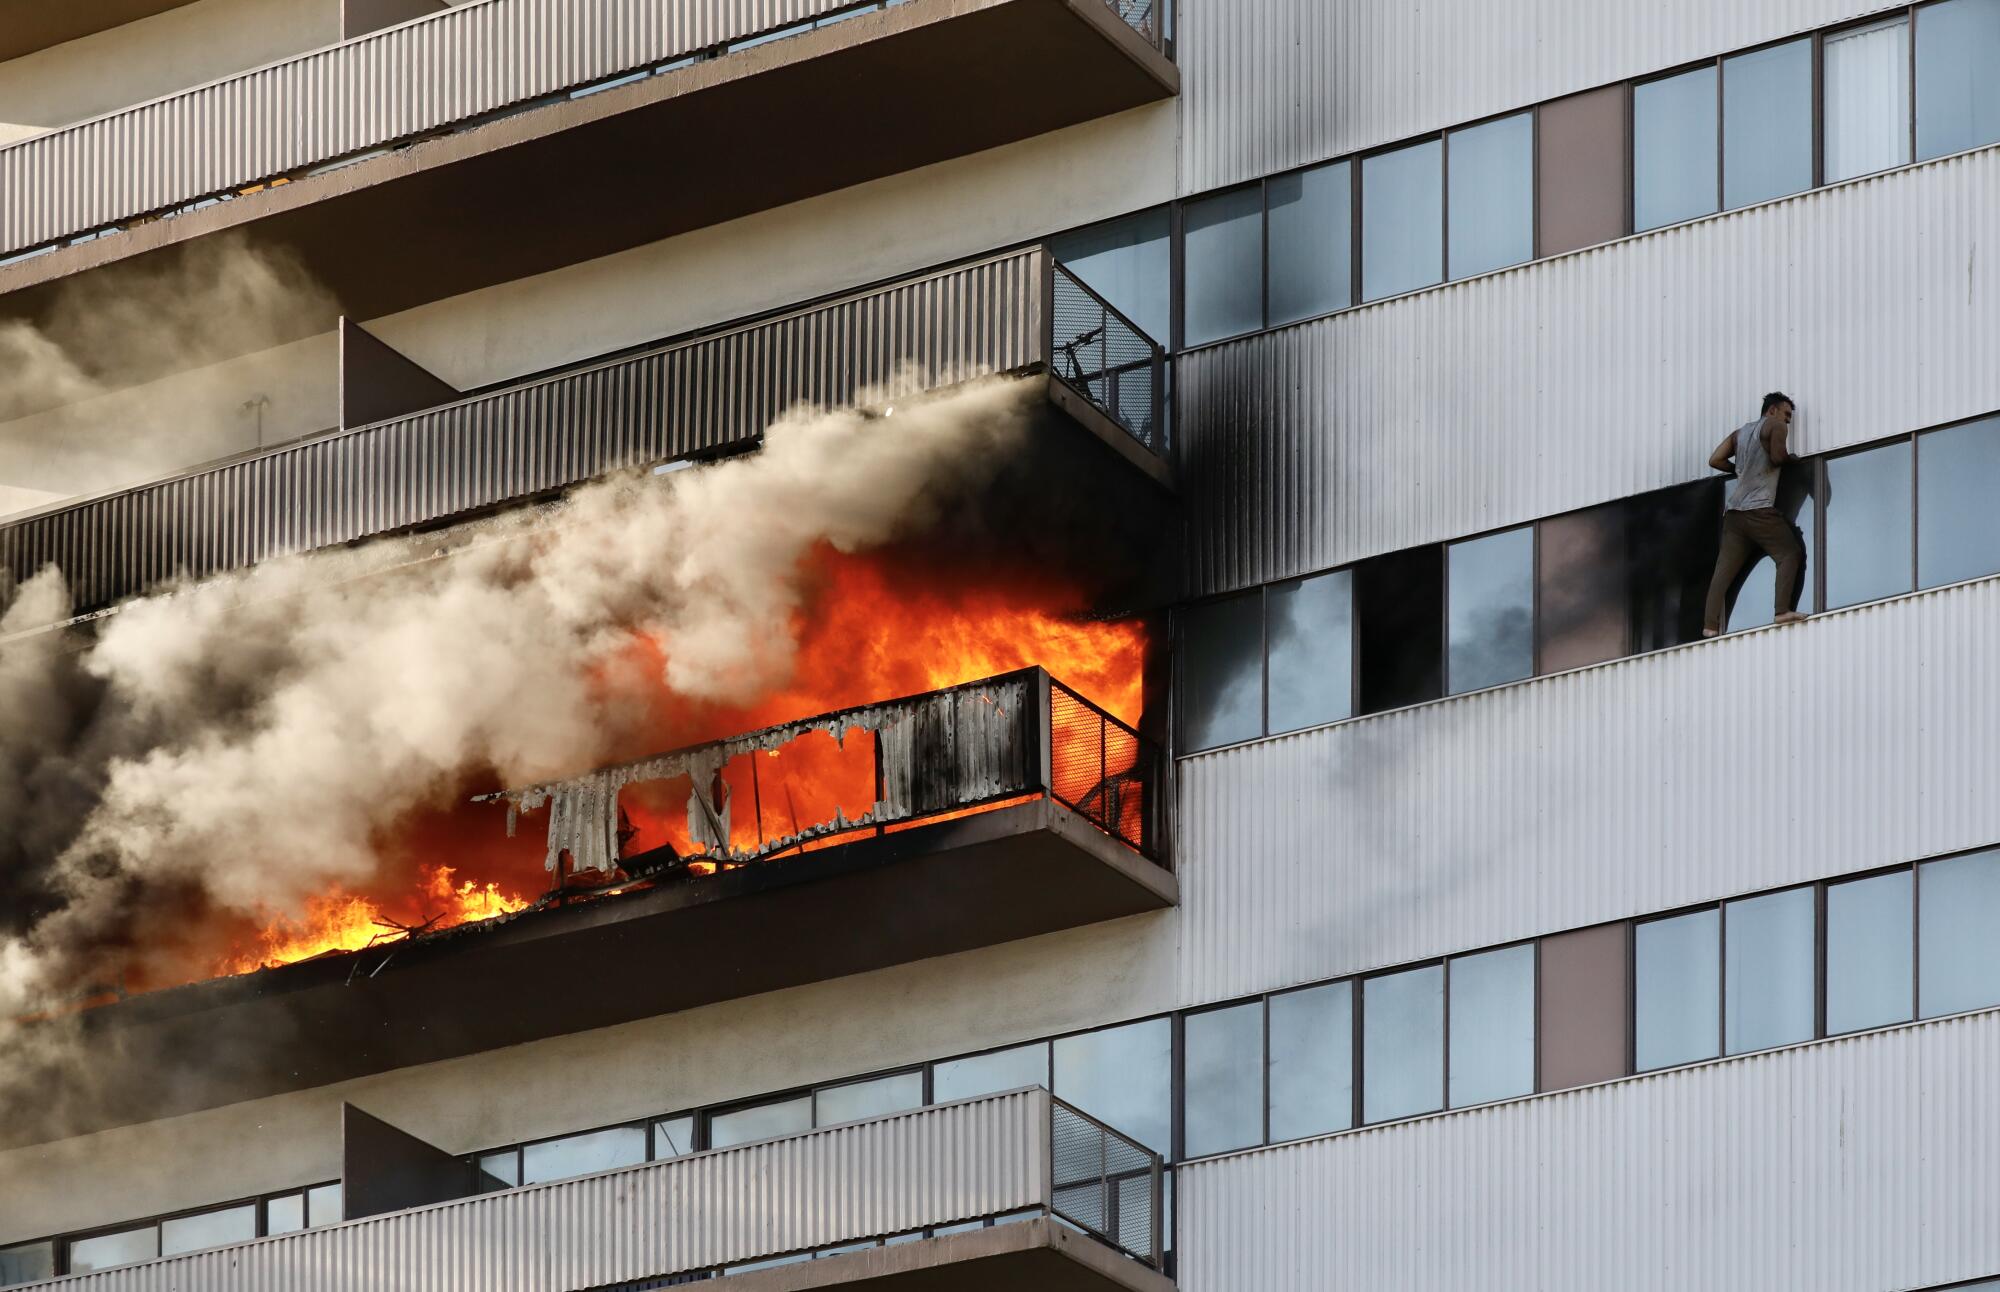 A resident, arms blackened, stands on the ledge of a window several stories up. Fire rages on a balcony near him.